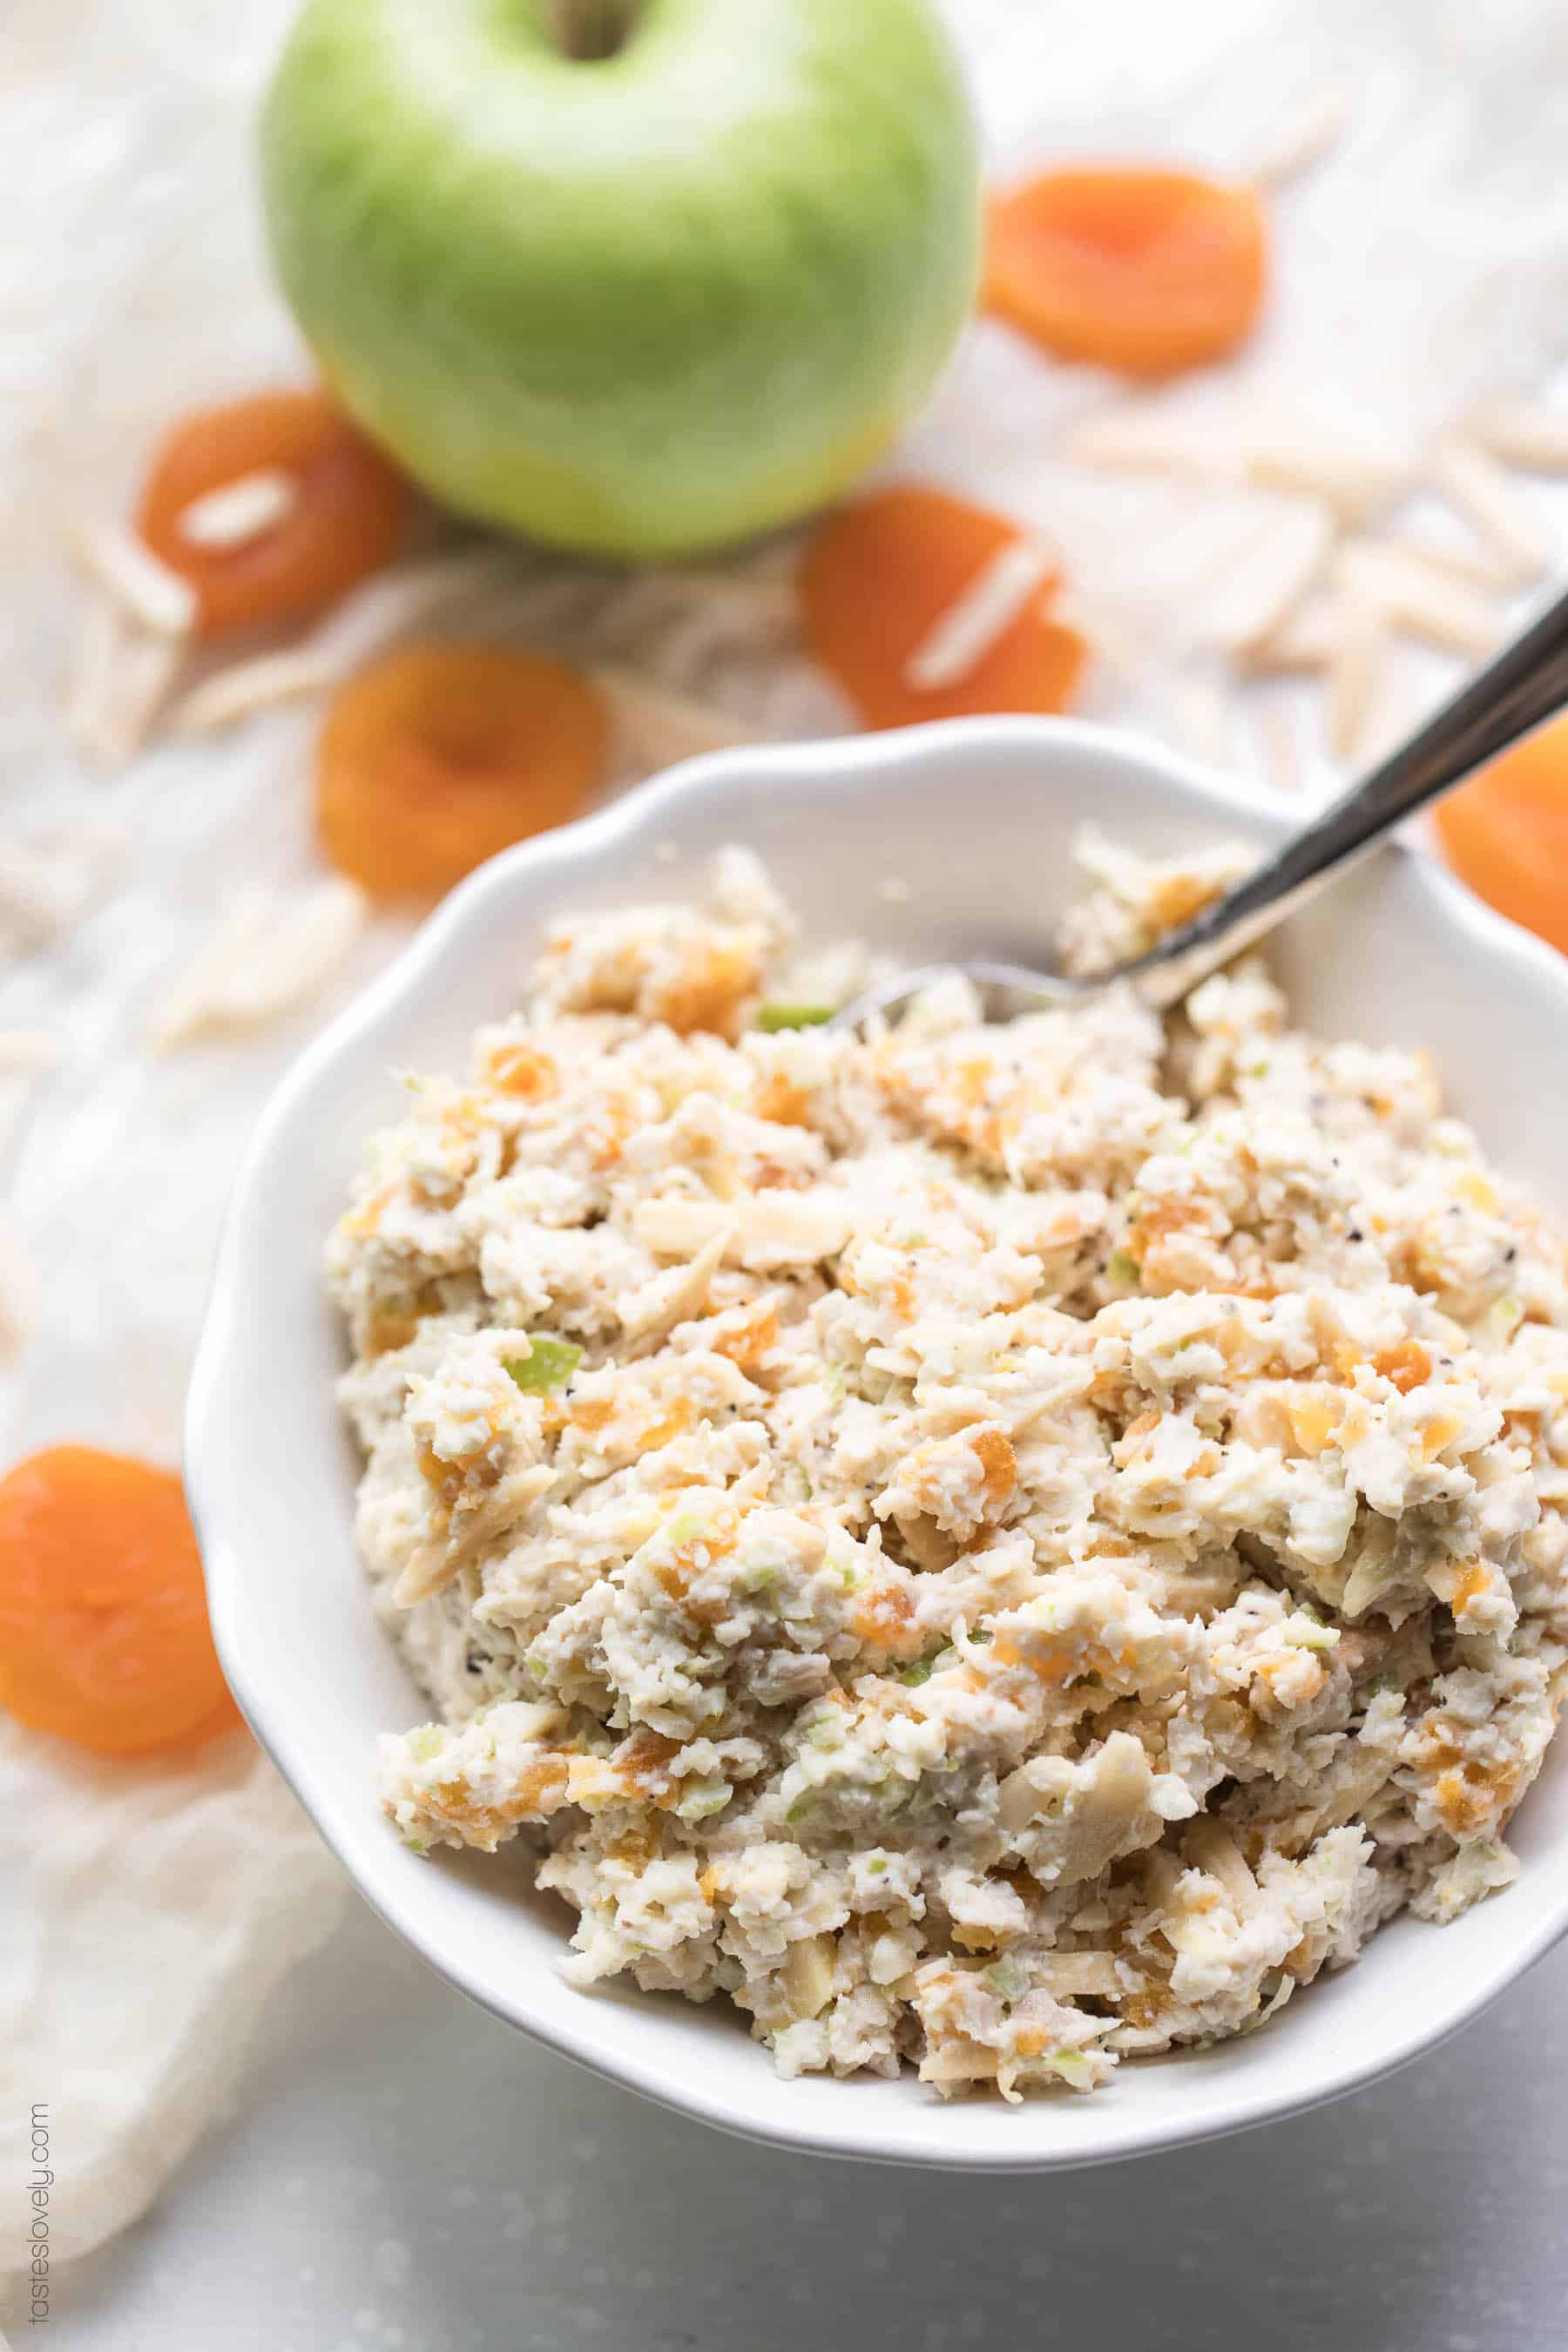 Paleo & Whole30 Apricot and Almond Chicken Salad Recipe - a light and flavorful chicken salad. My favorite meal prep lunch for the week! Gluten free, grain free, dairy free, sugar free, clean eating.